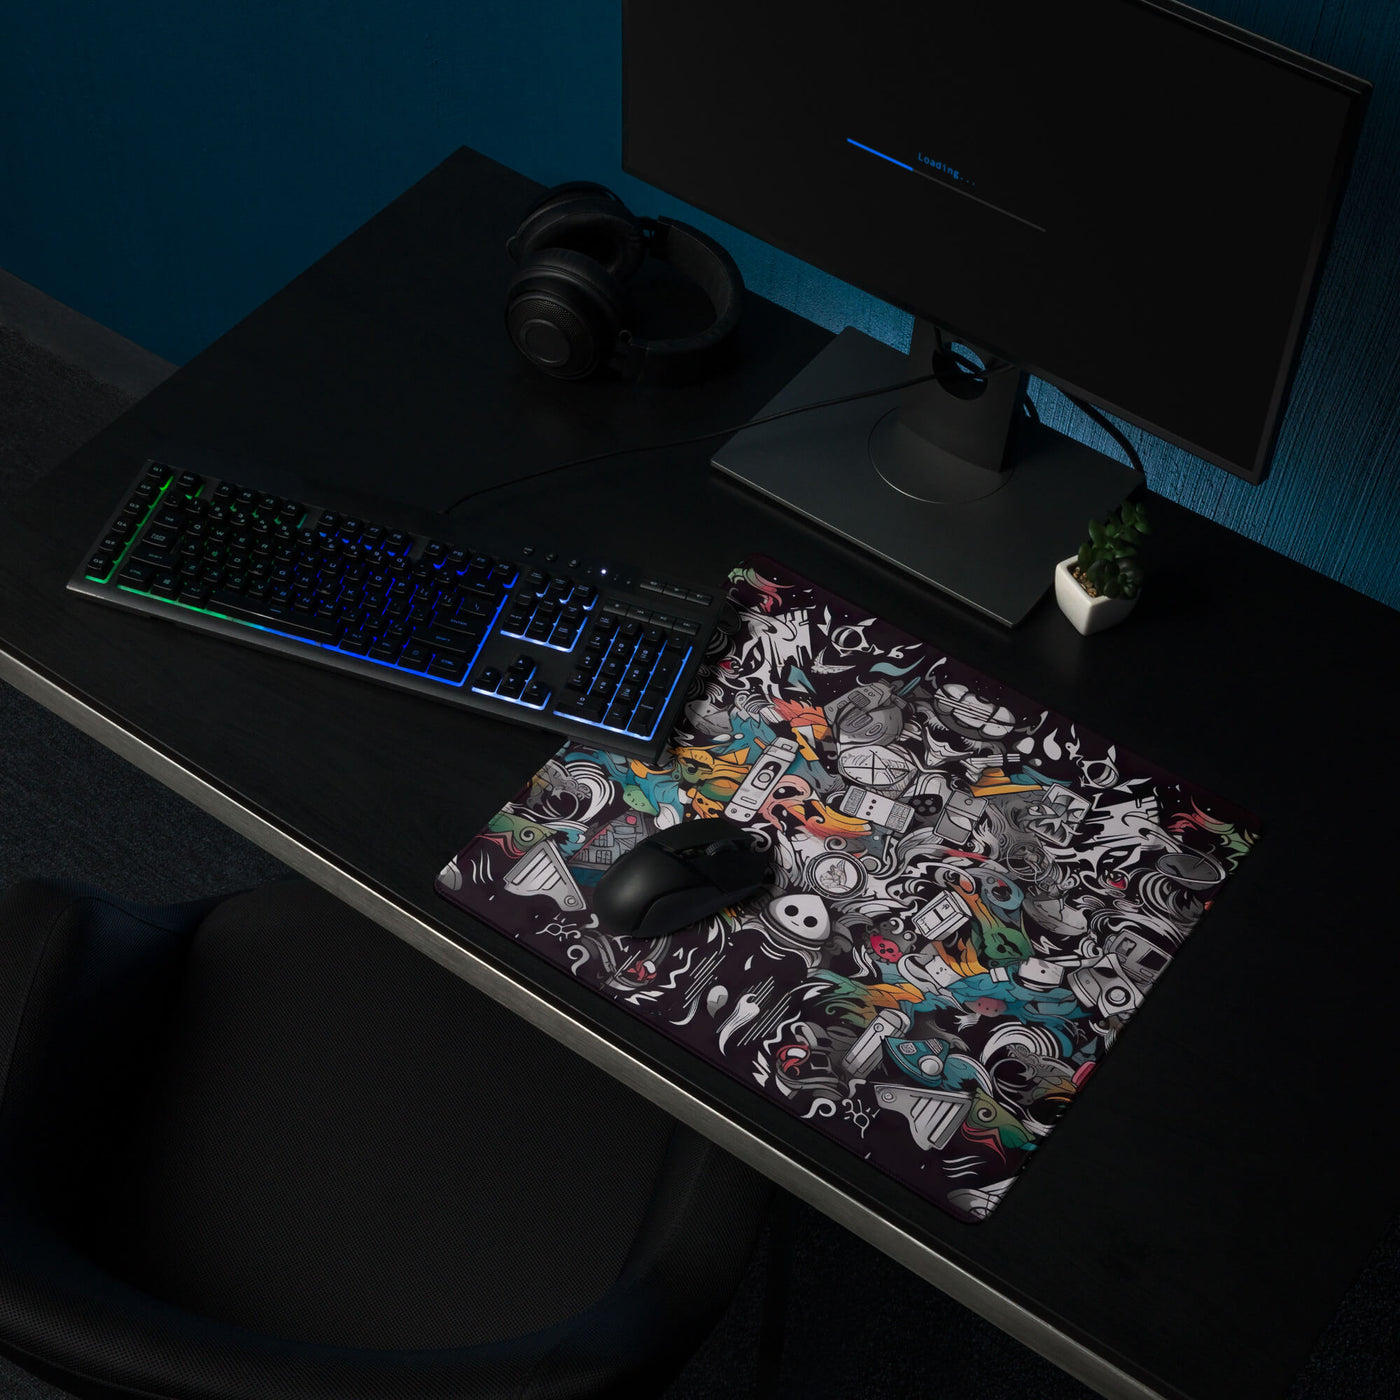 Premium Gaming Mouse Pad | Abstract Cartoon Doodle